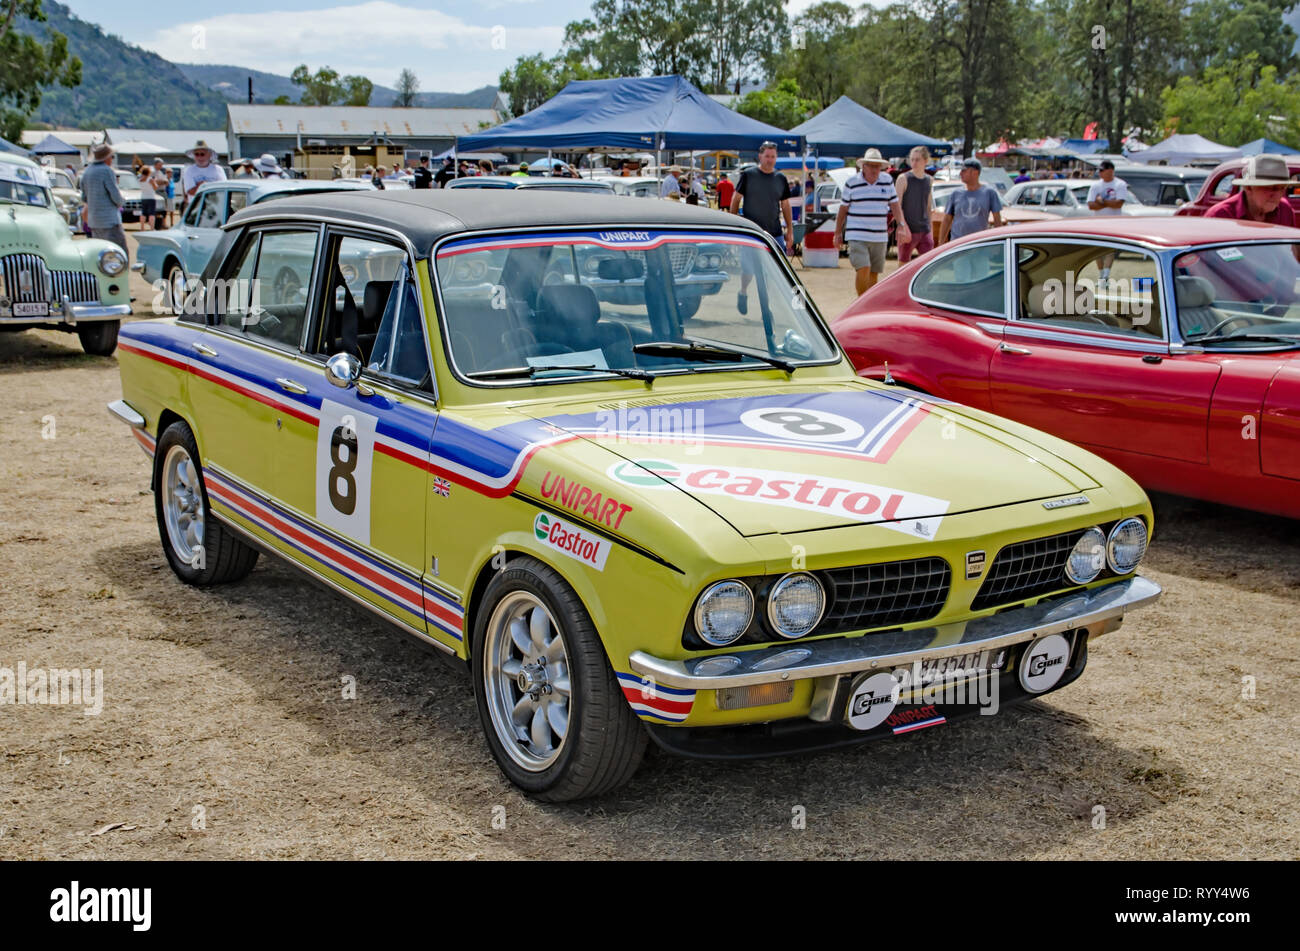 1973-74 Triumph Sprint in rally paint Stock Photo - Alamy